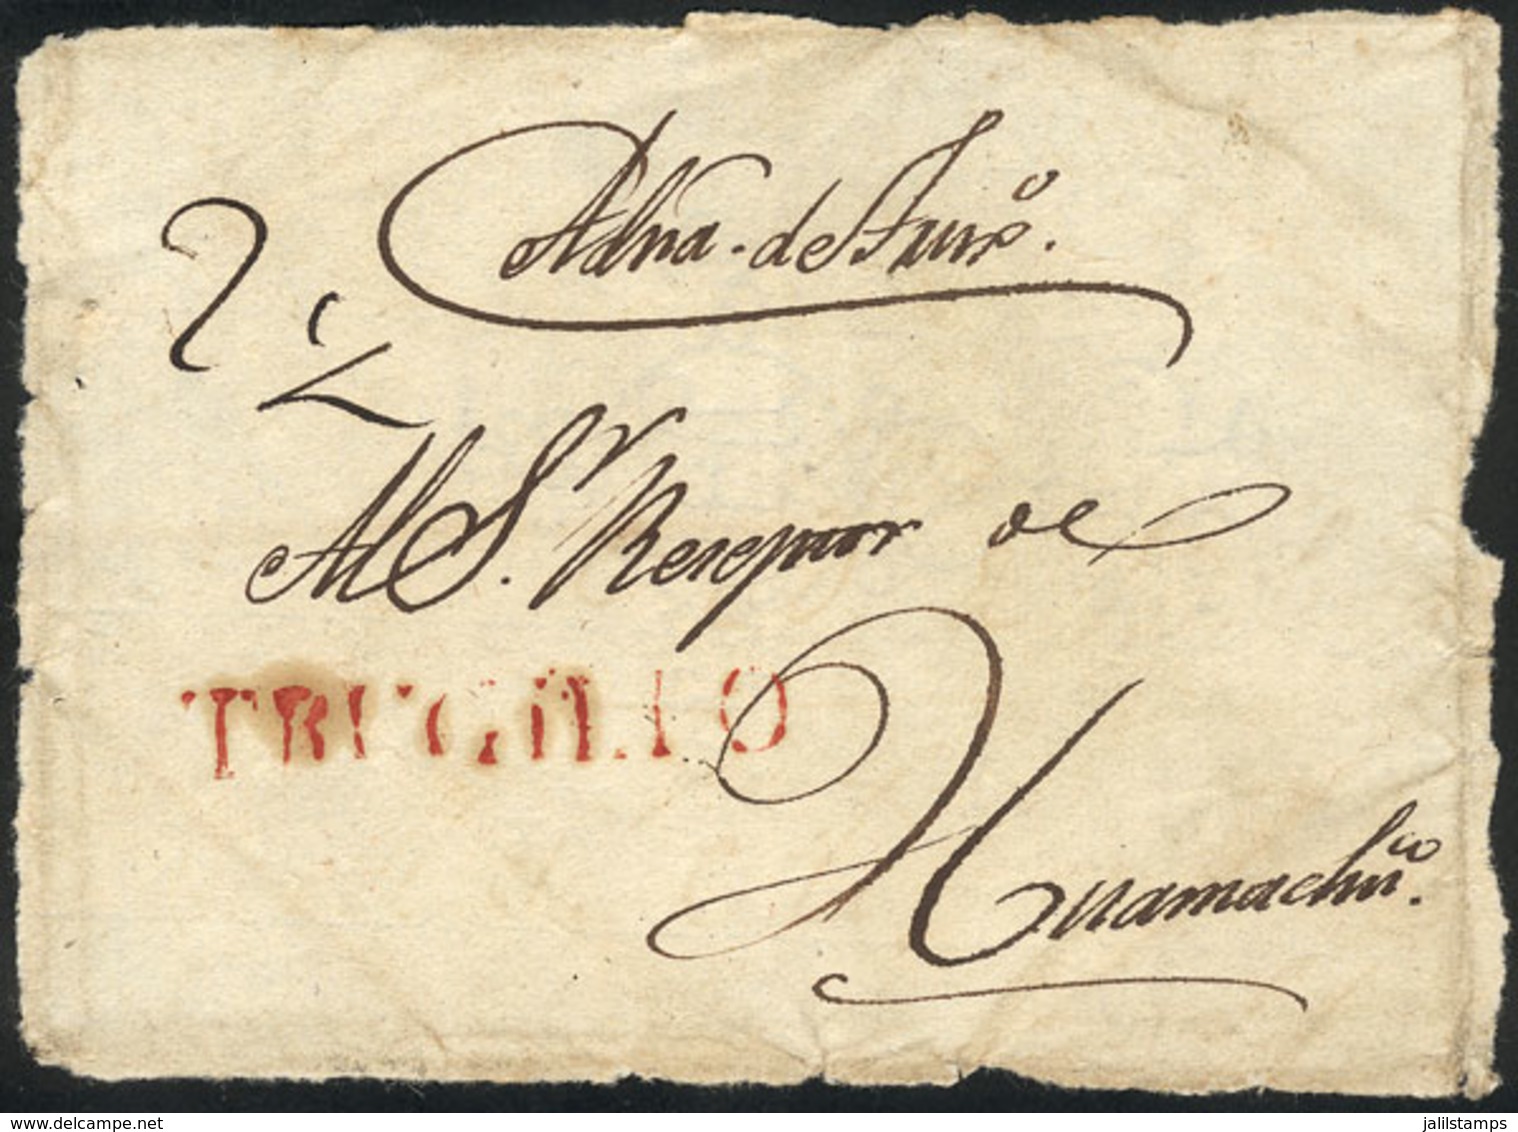 PERU: Circa 1829: Front Of A Folded Cover To Huamachuco, With The Rare "TRUGILIO" Marking (45 X 7 Mm) In Red Perfectly A - Pérou